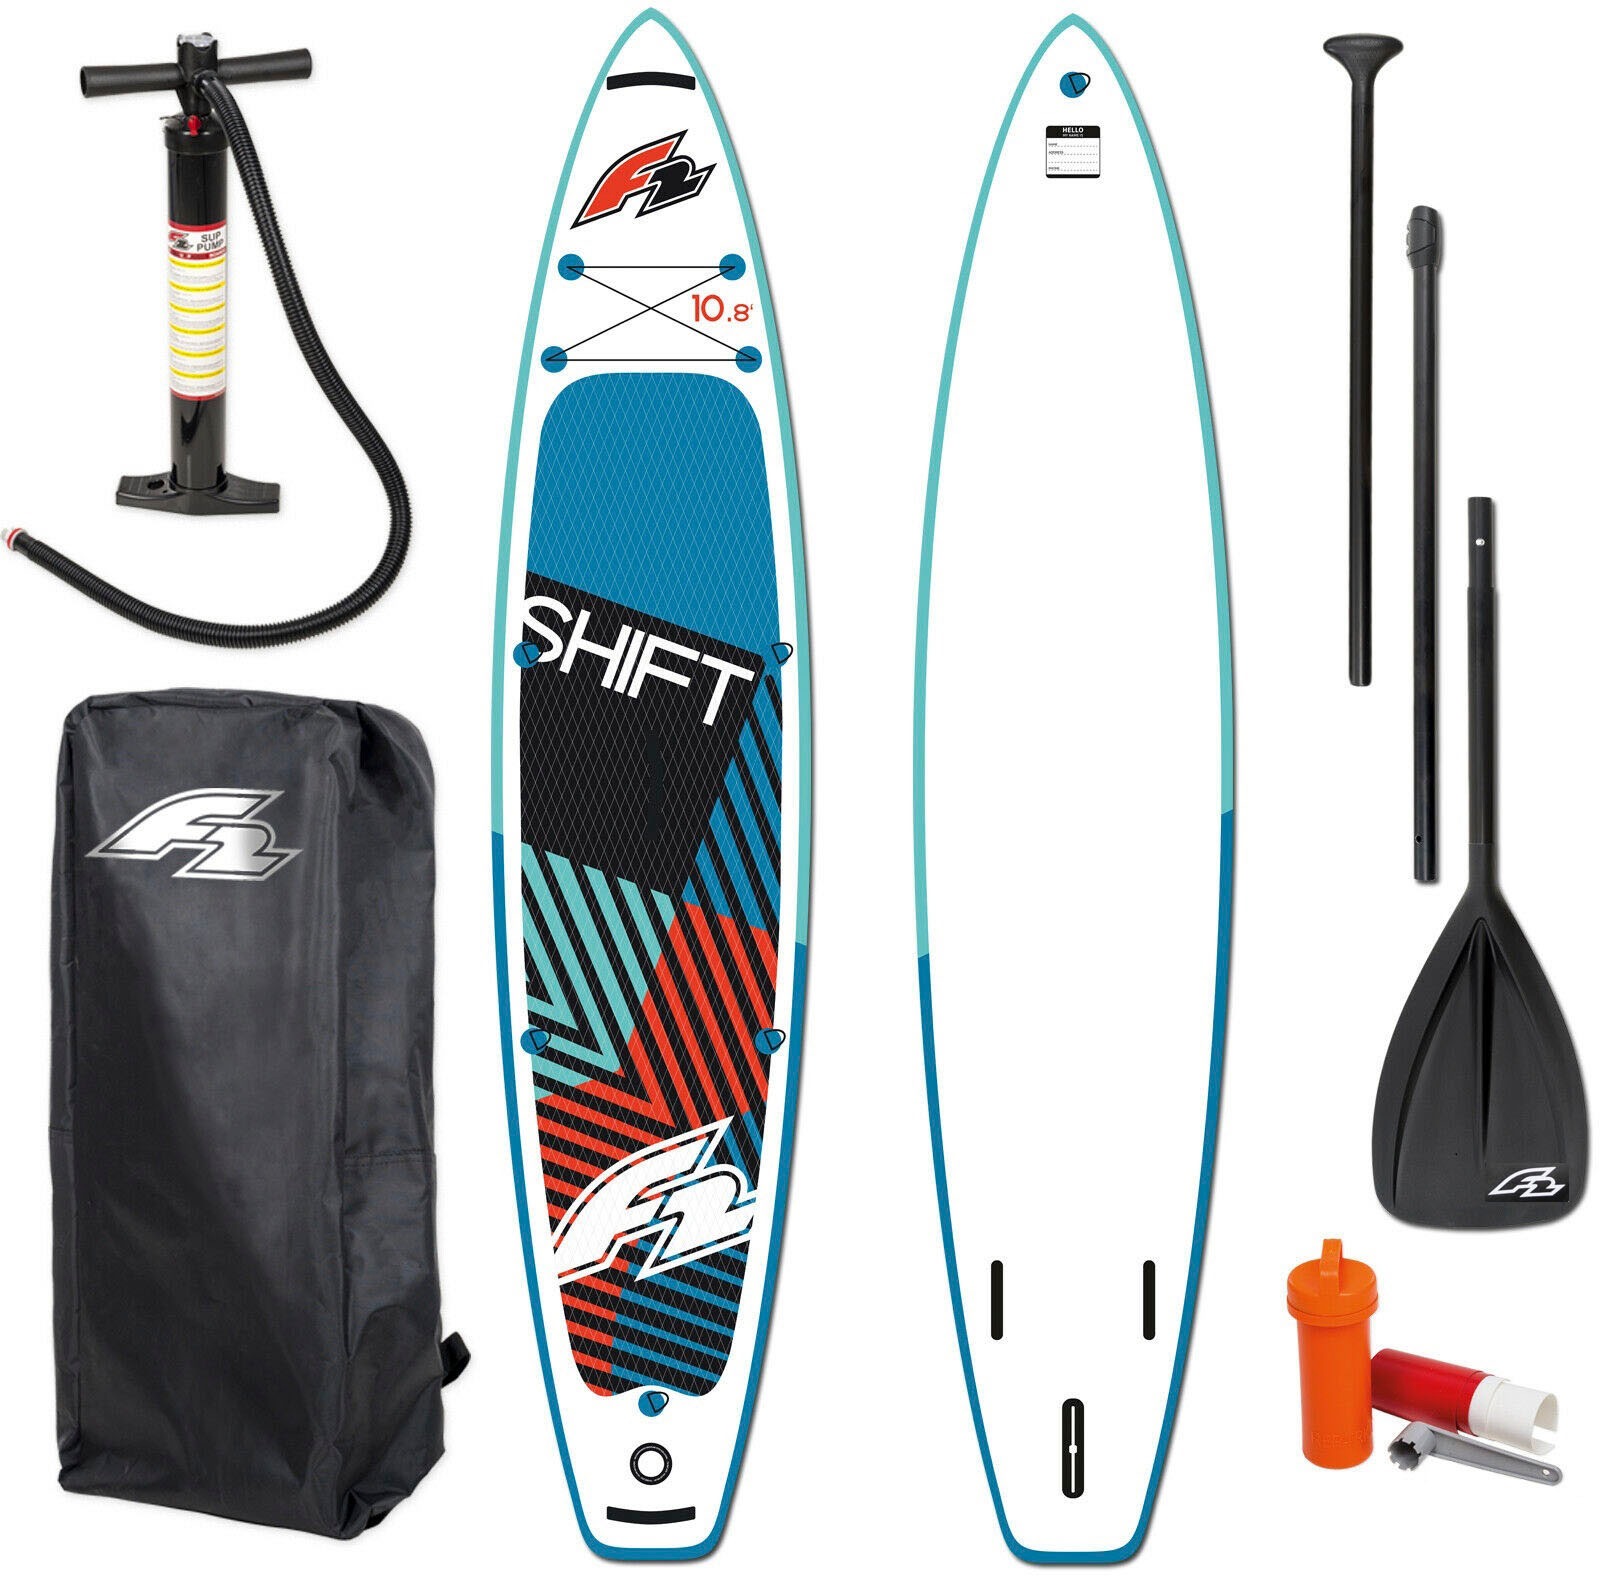 F2 Inflatable SUP-Board »Shift 10,8«, (Packung, 5 tlg.) im OTTO Online Shop | SUP-Boards